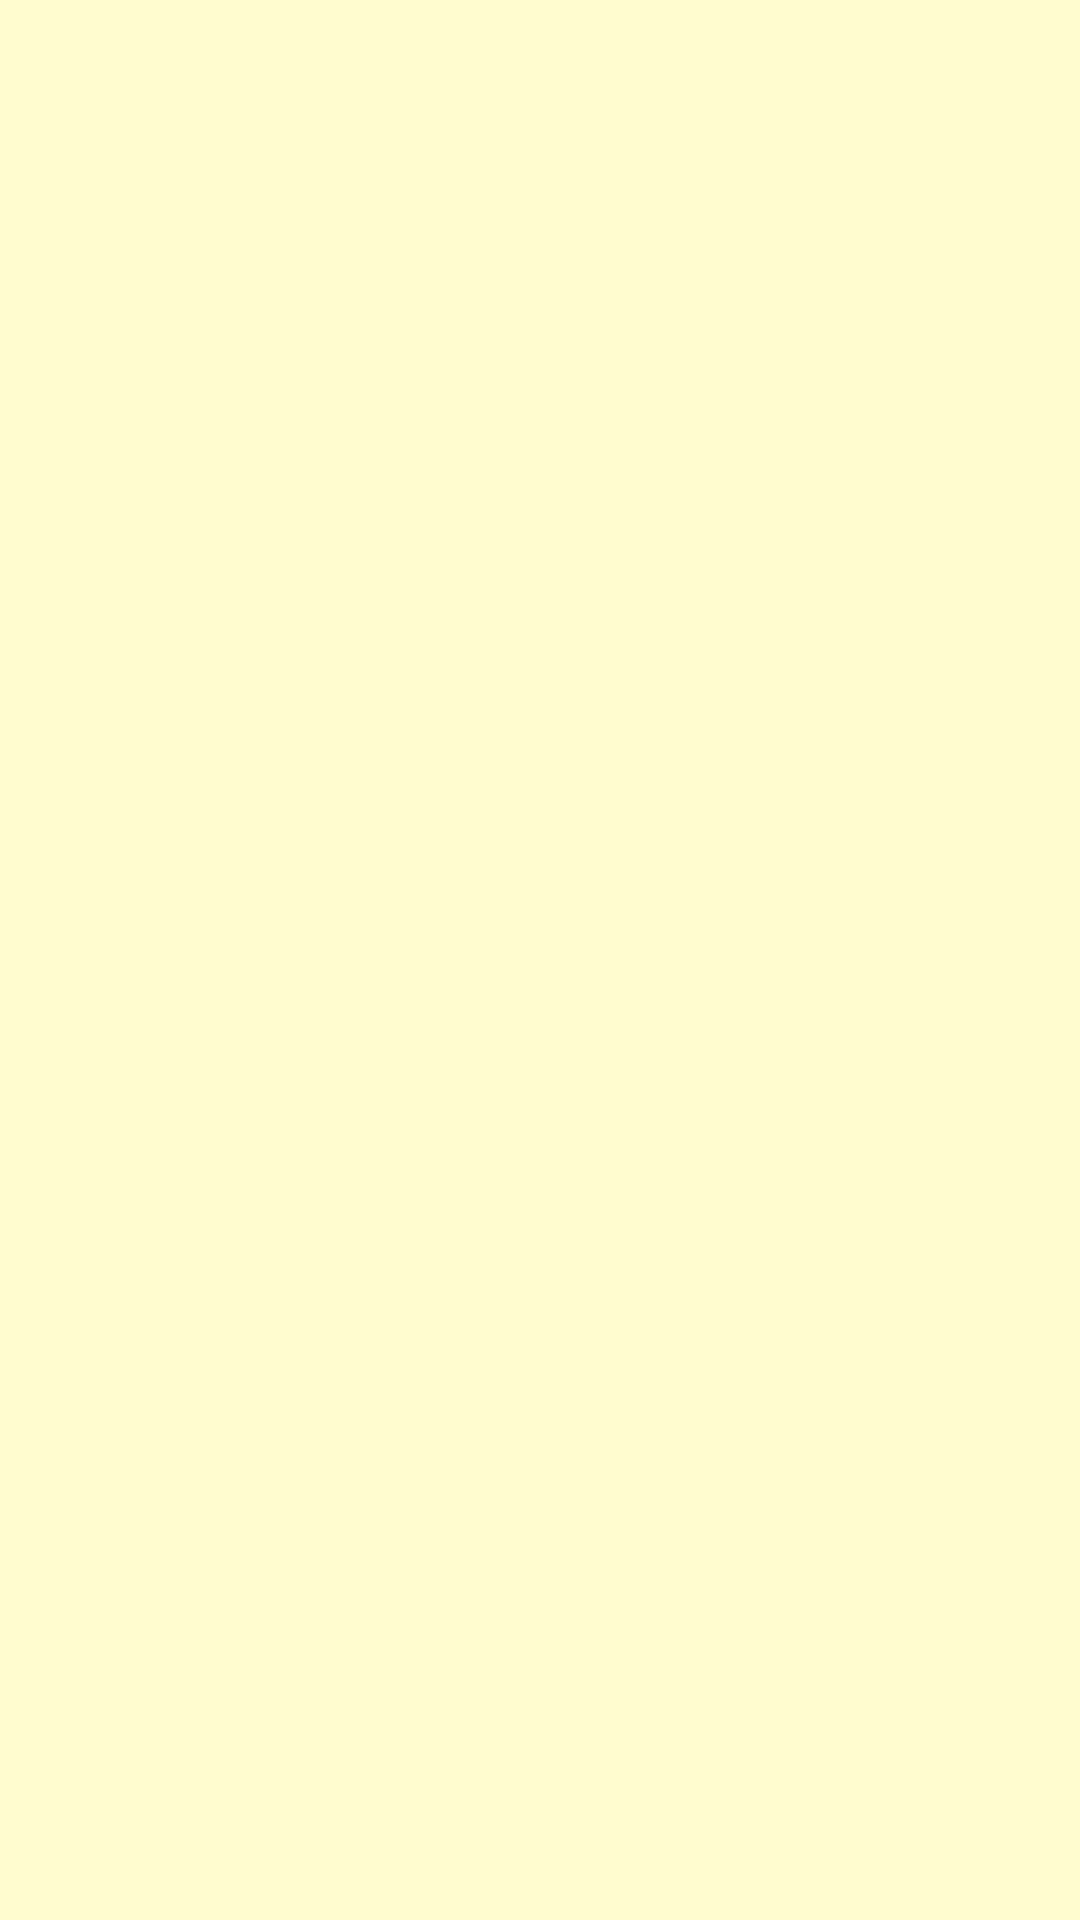 1080x1920 Cream Solid Color Background